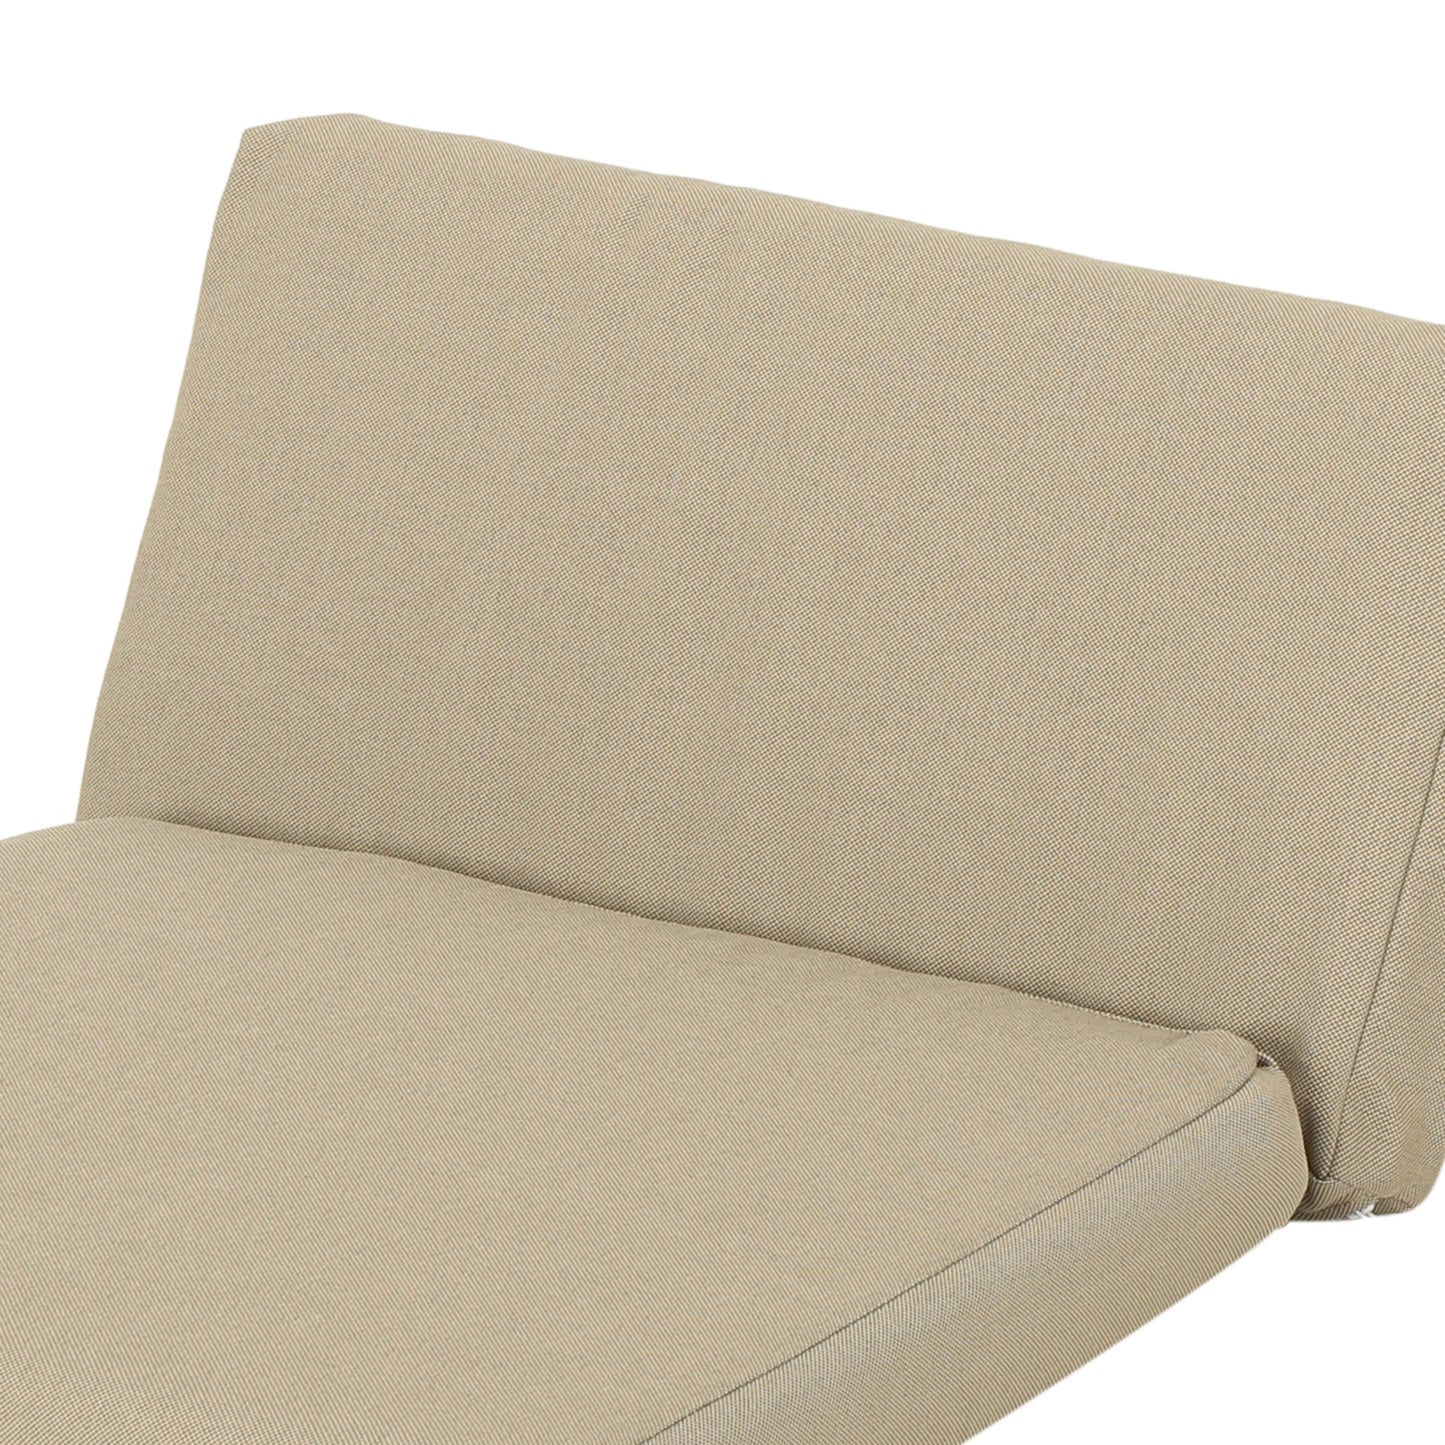 Illyria Outdoor Water Resistant Fabric Club Chair Cushions (Set of 2)